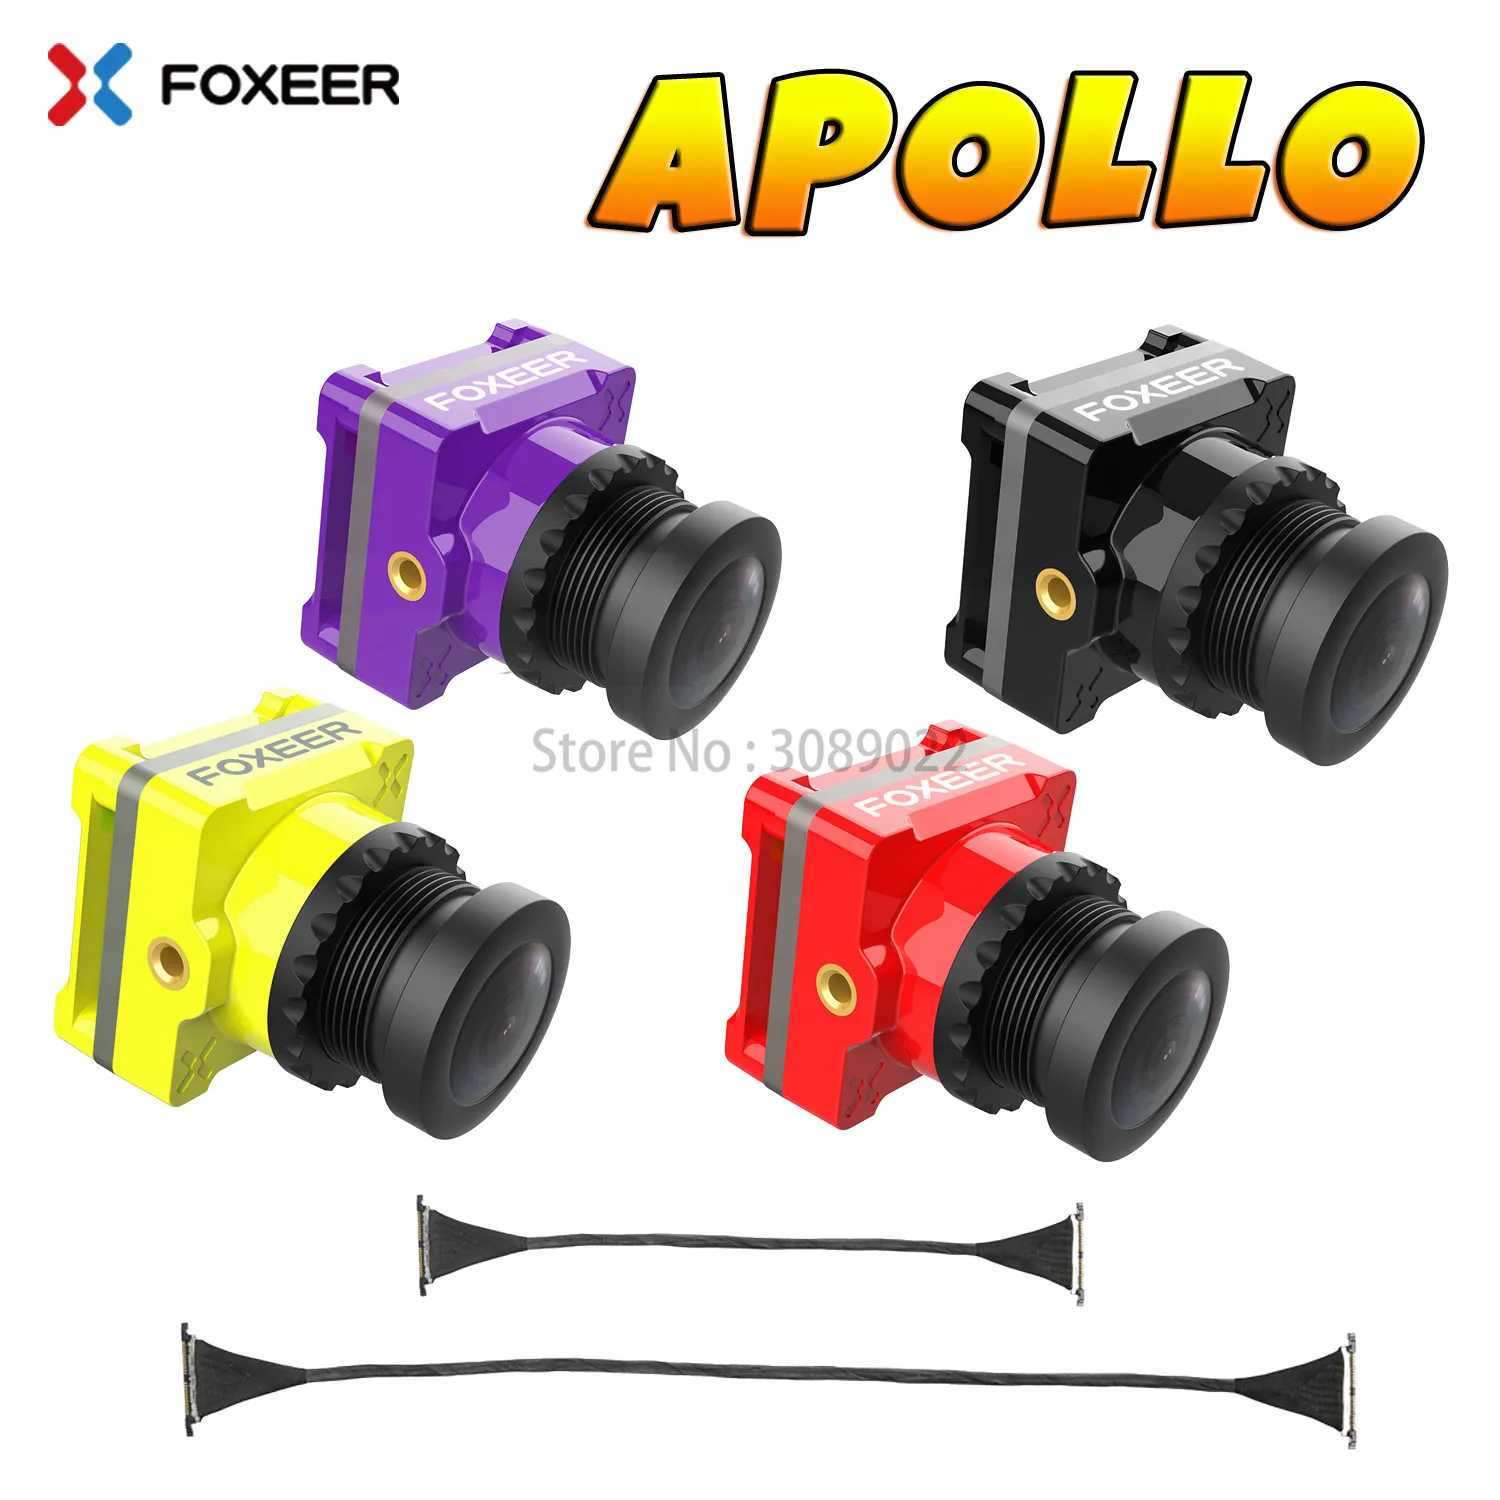 Foxeer Apollo Digital Standart 160° Red + 13cm cable